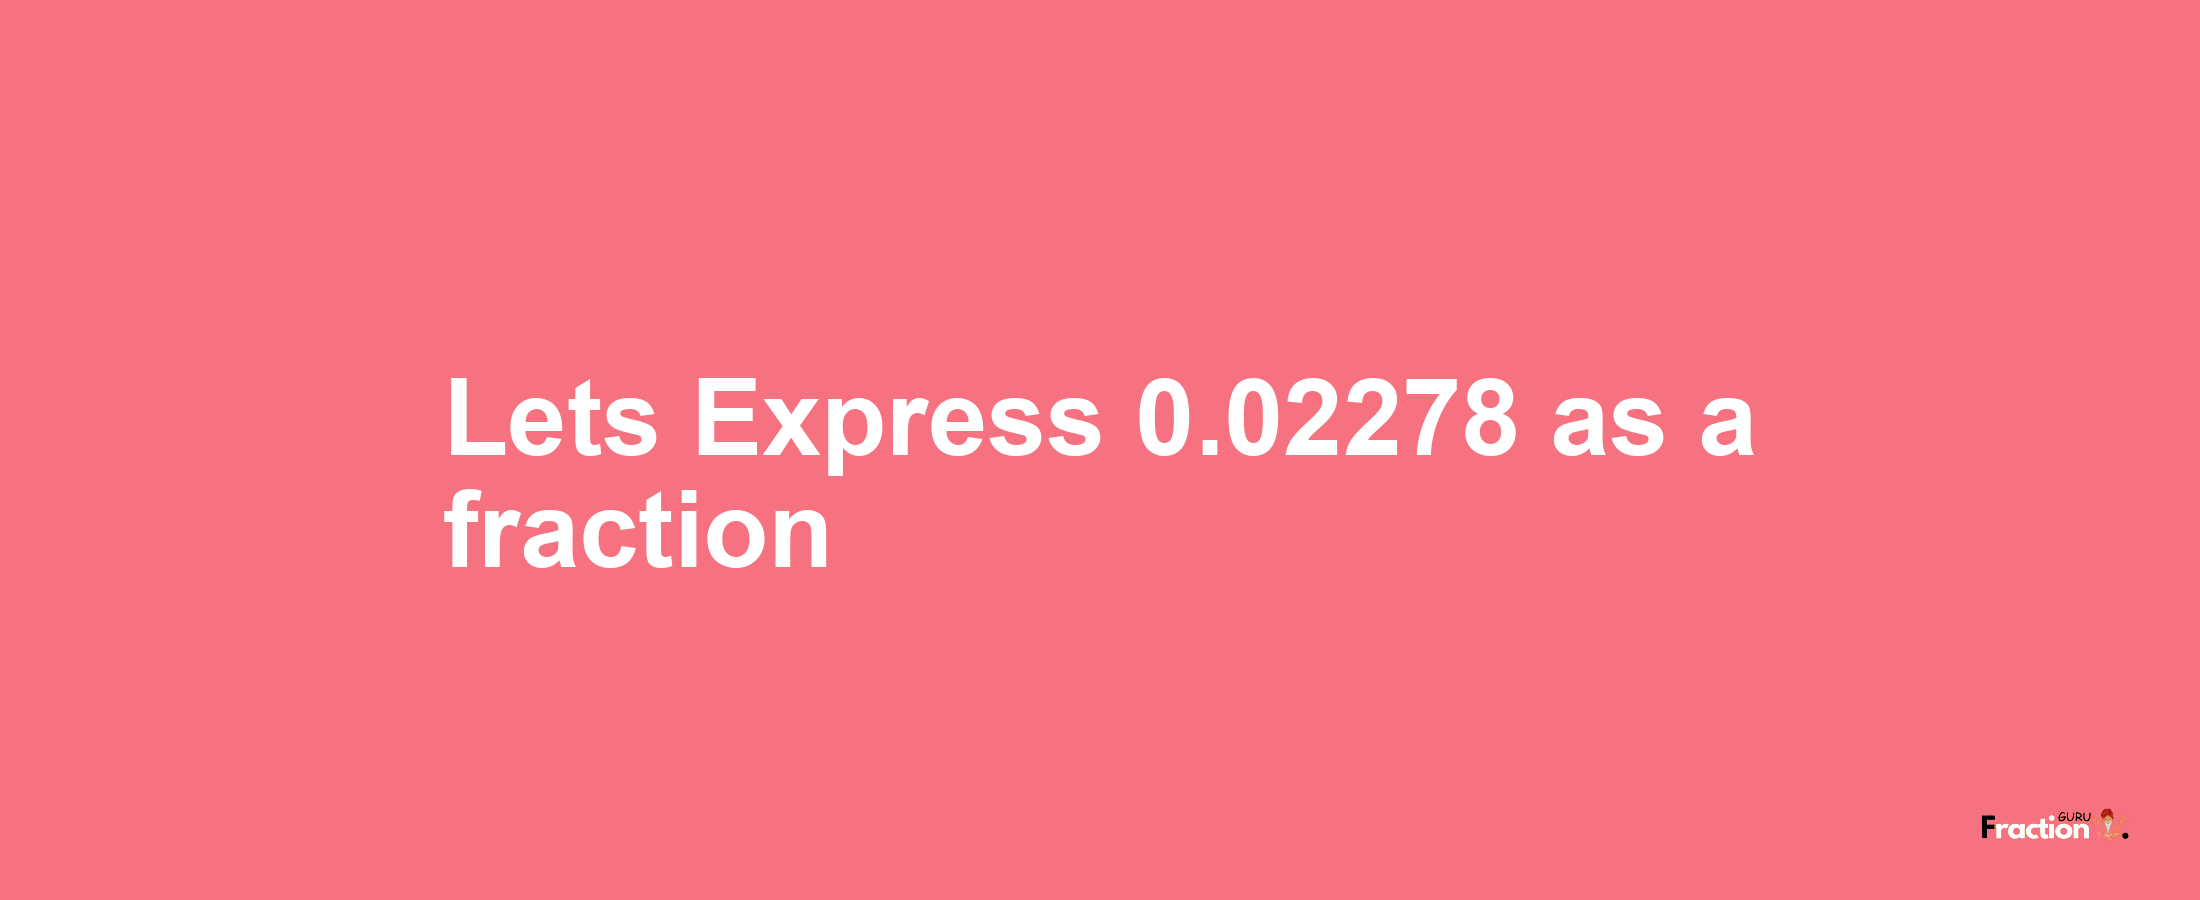 Lets Express 0.02278 as afraction